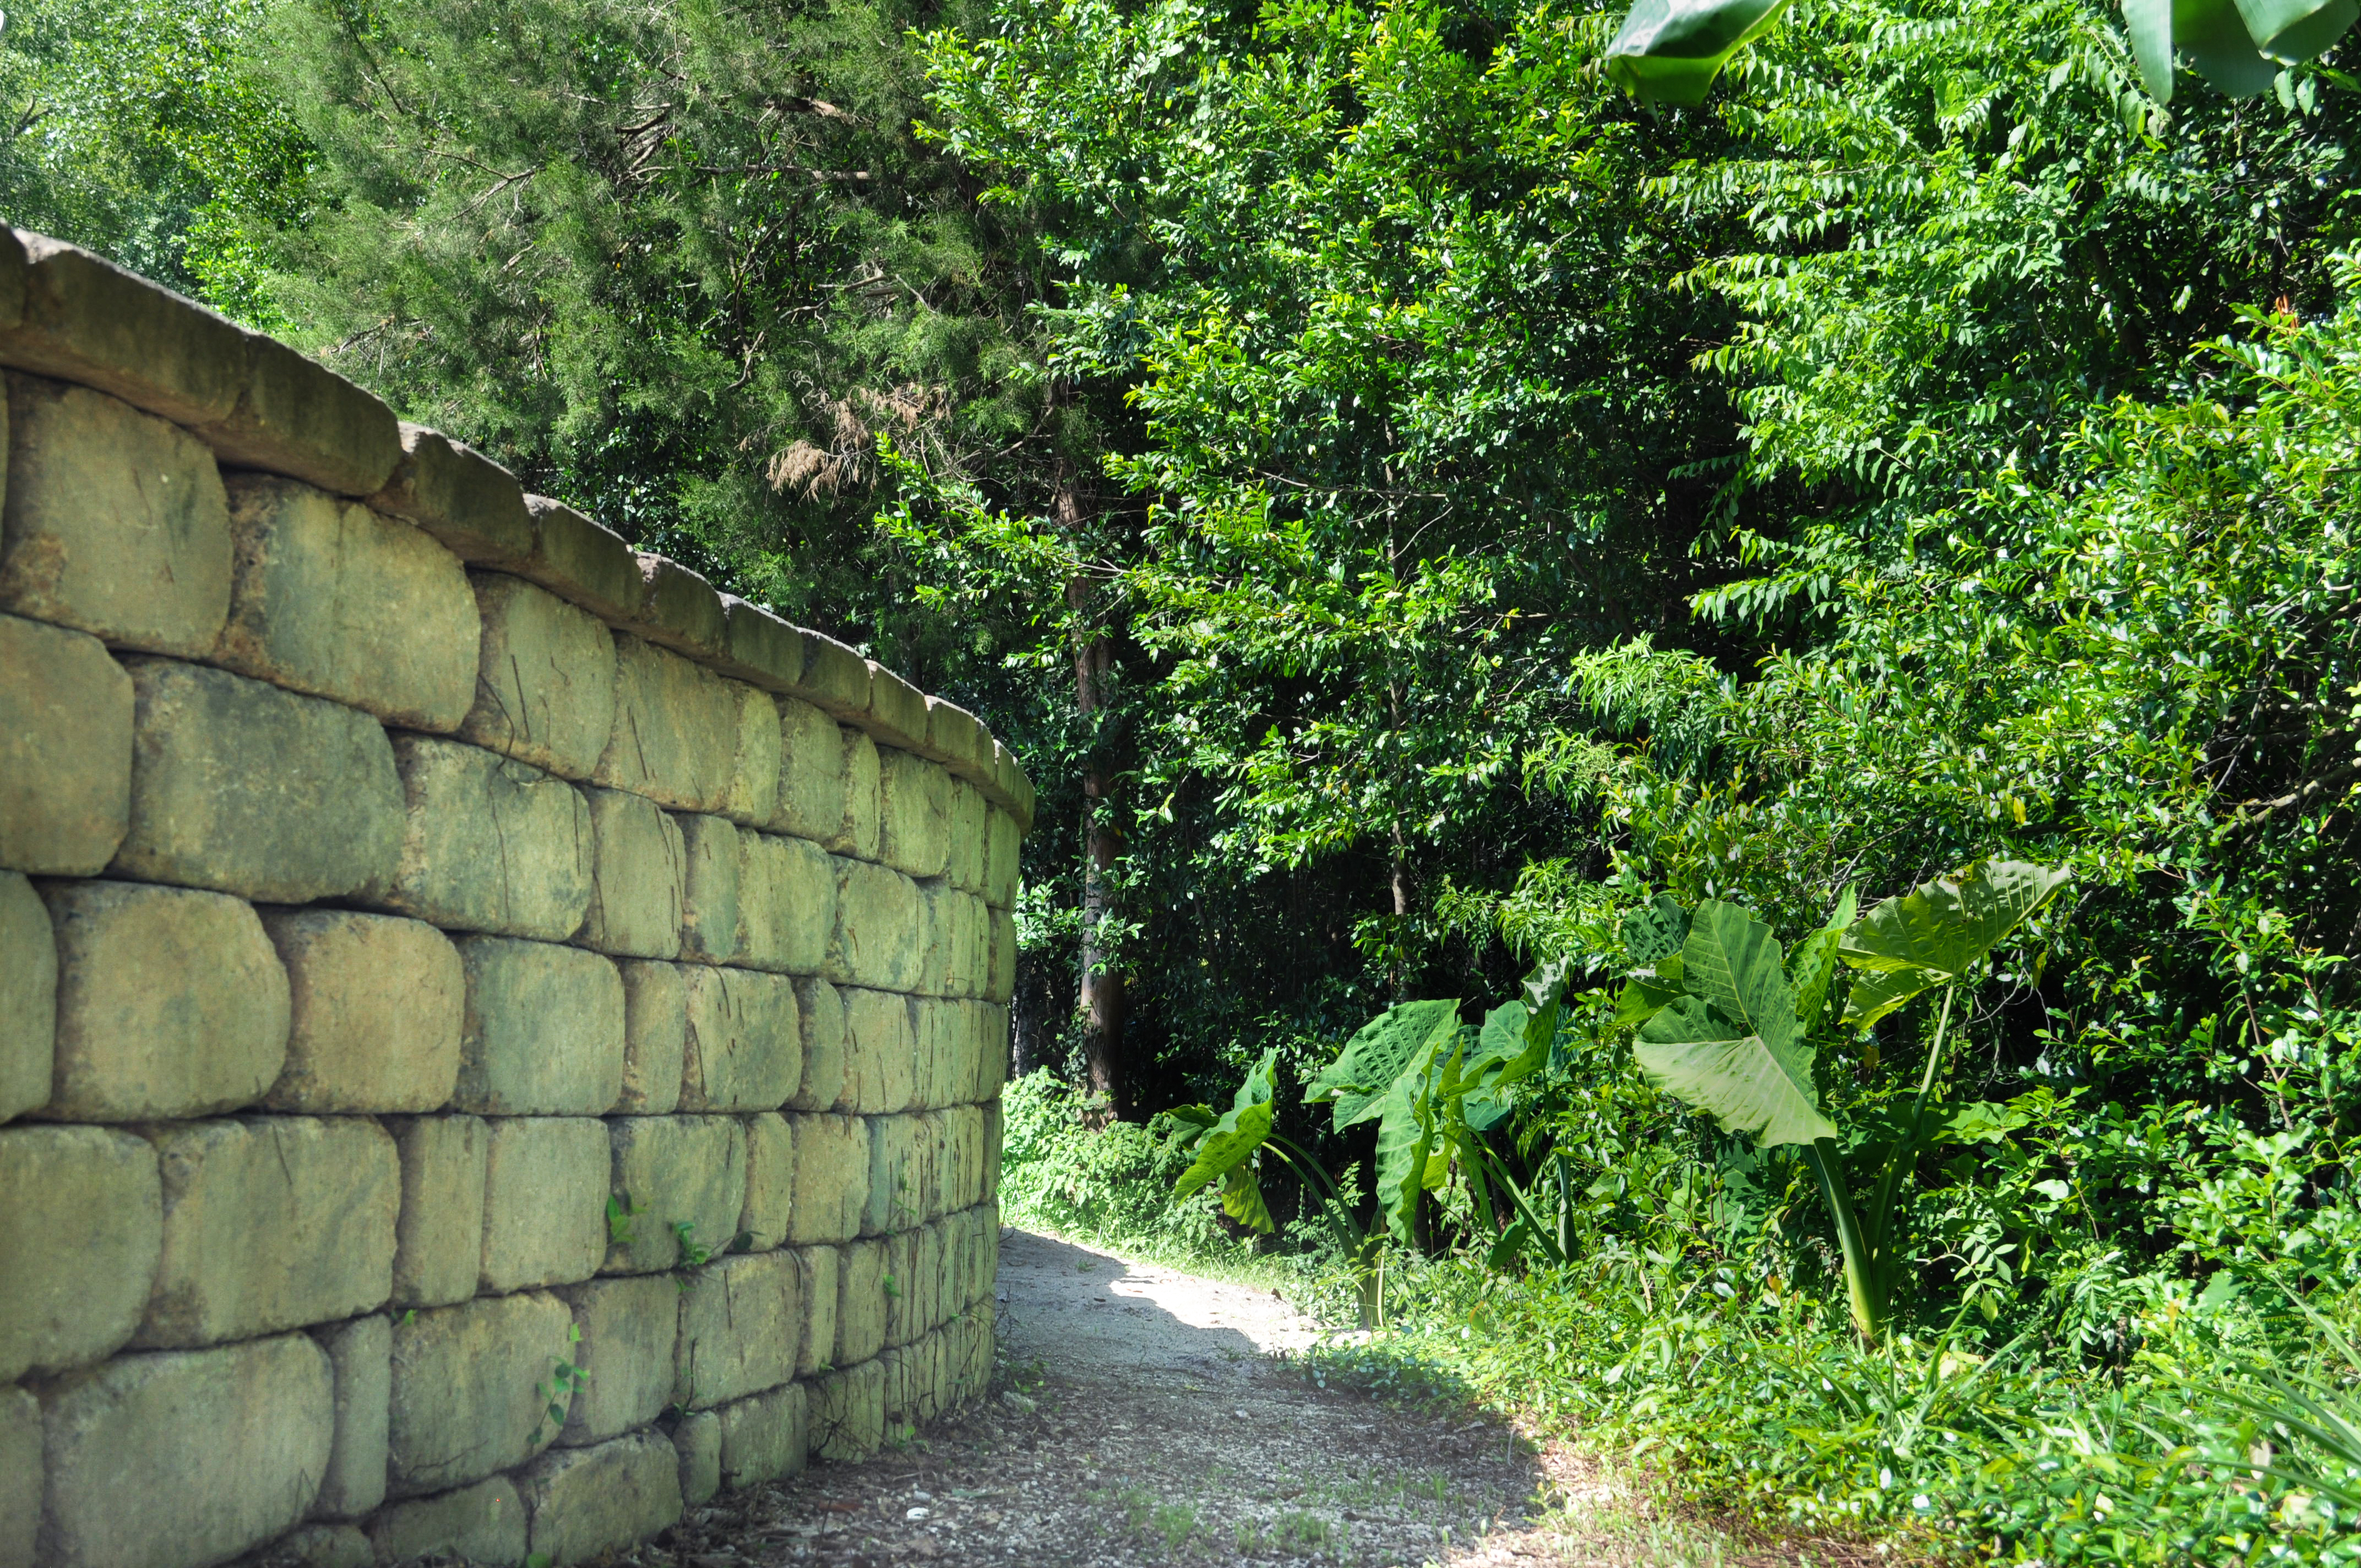 A reconstructed landscape retaining wall